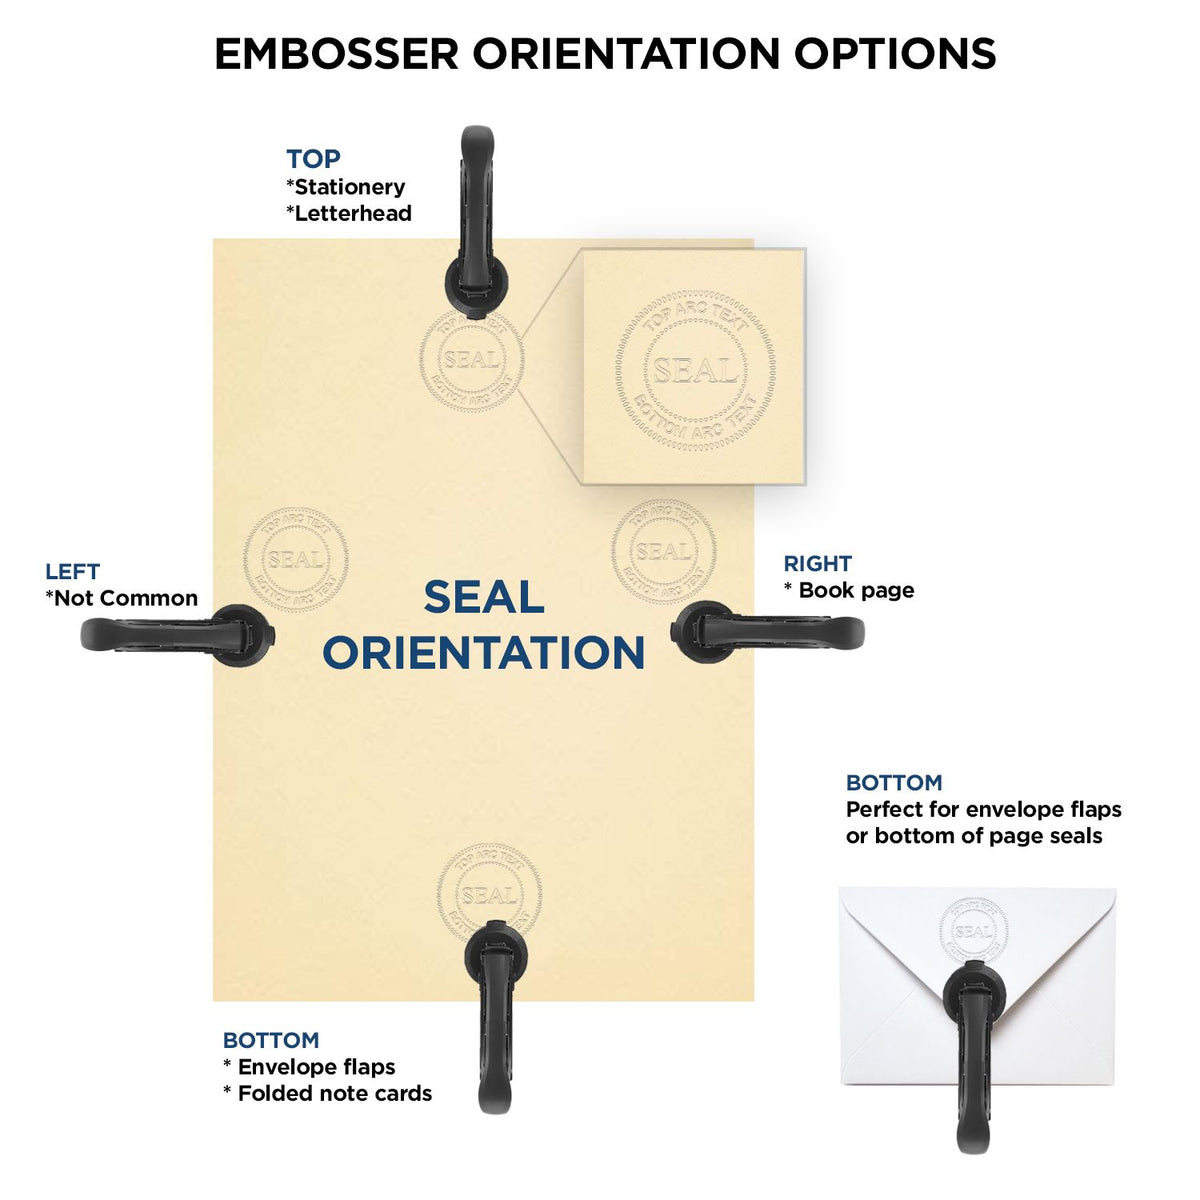 An infographic for the Heavy Duty Cast Iron Indiana Land Surveyor Seal Embosser showing embosser orientation, this is showing examples of a top, bottom, right and left insert.